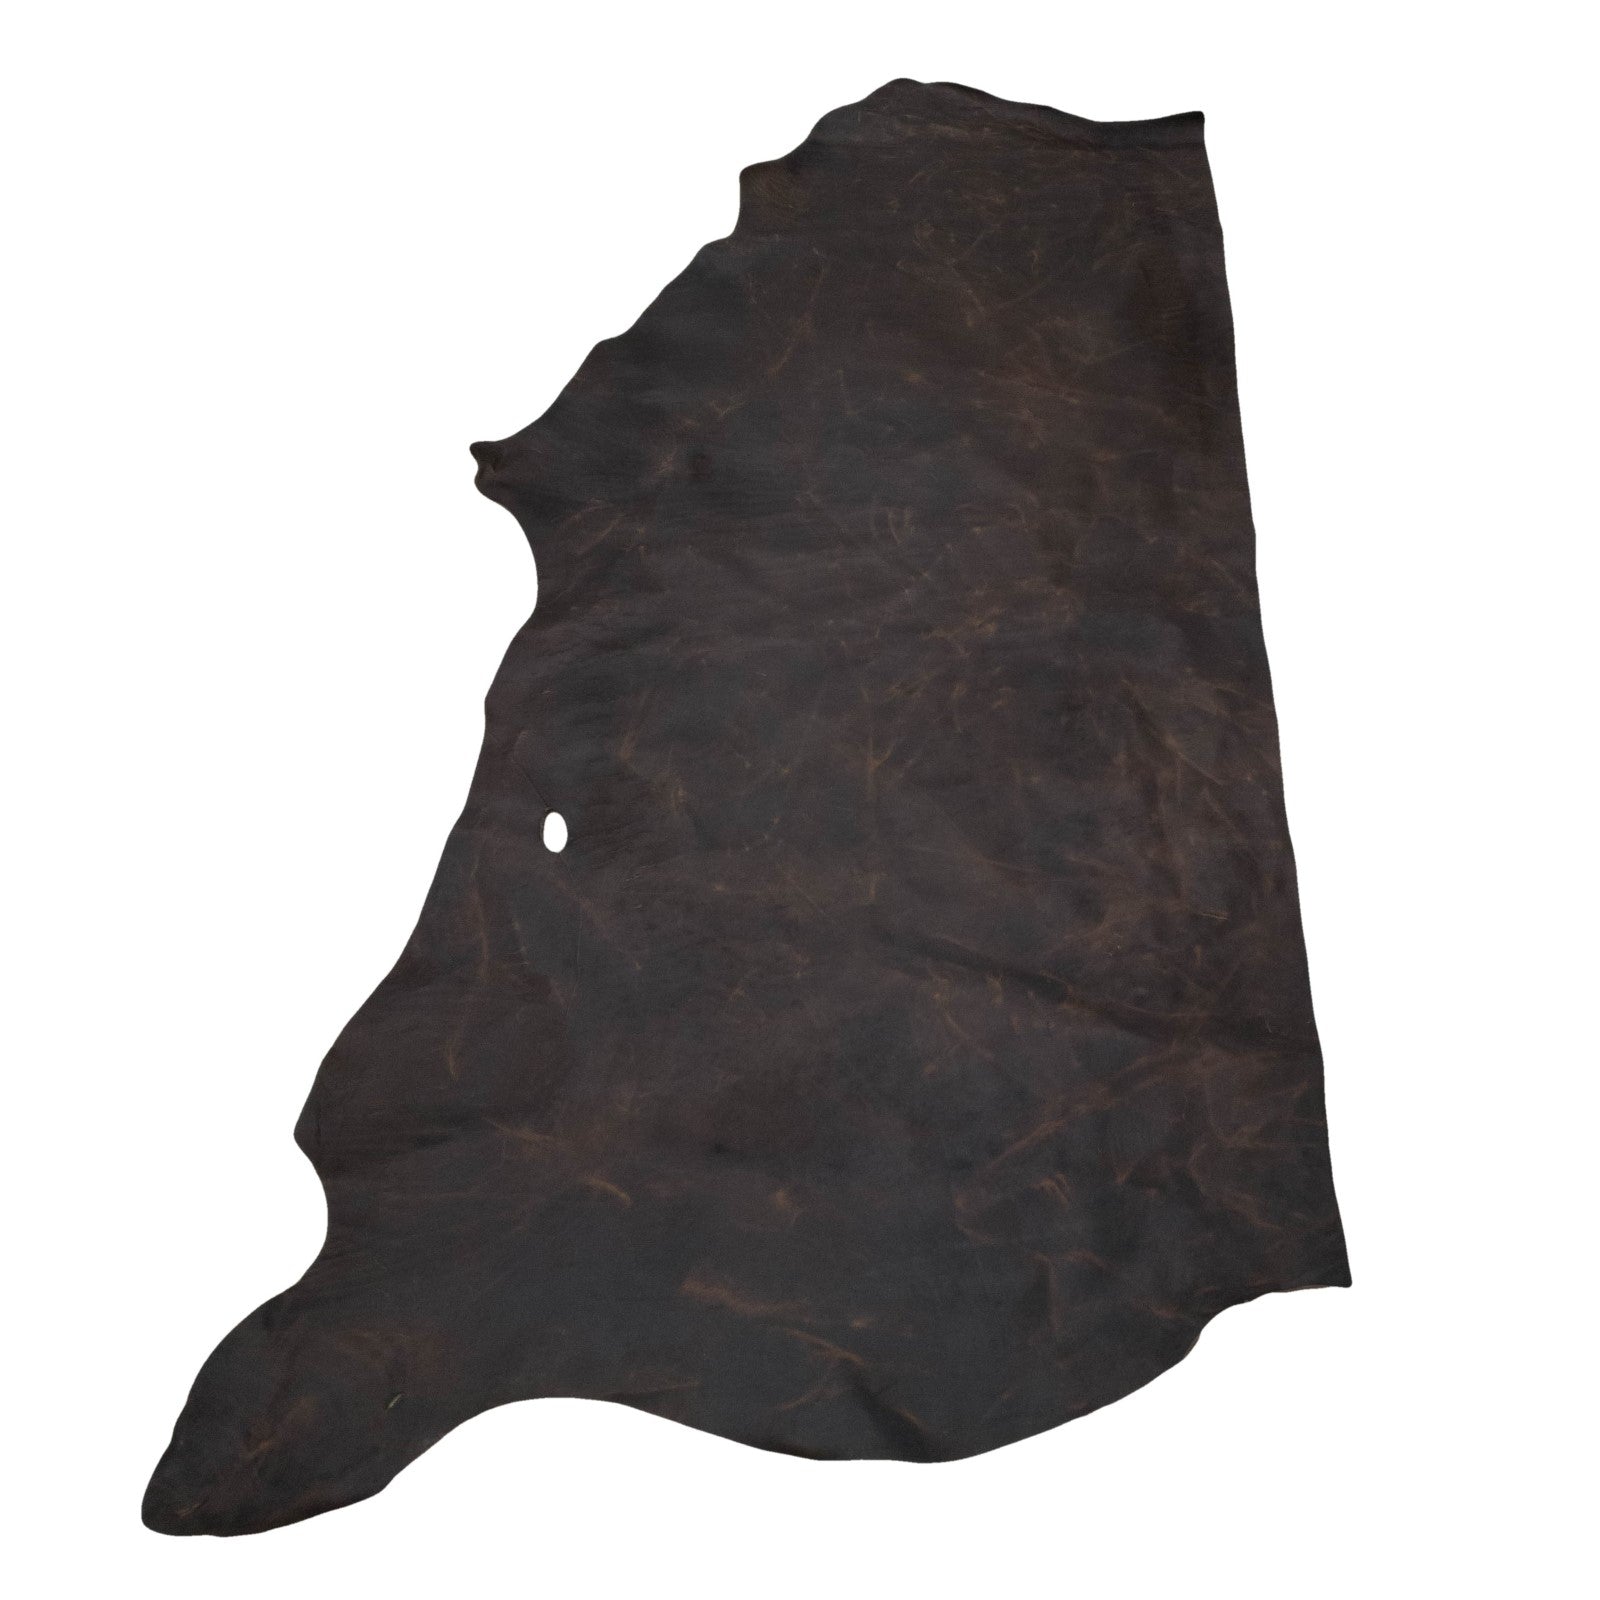 Sleeping Bear Dark Brown, 6.5-32 SqFt, 2-3 oz, Pull up Sides & Pieces, Crazy Buffalo, 18-20 / Side | The Leather Guy